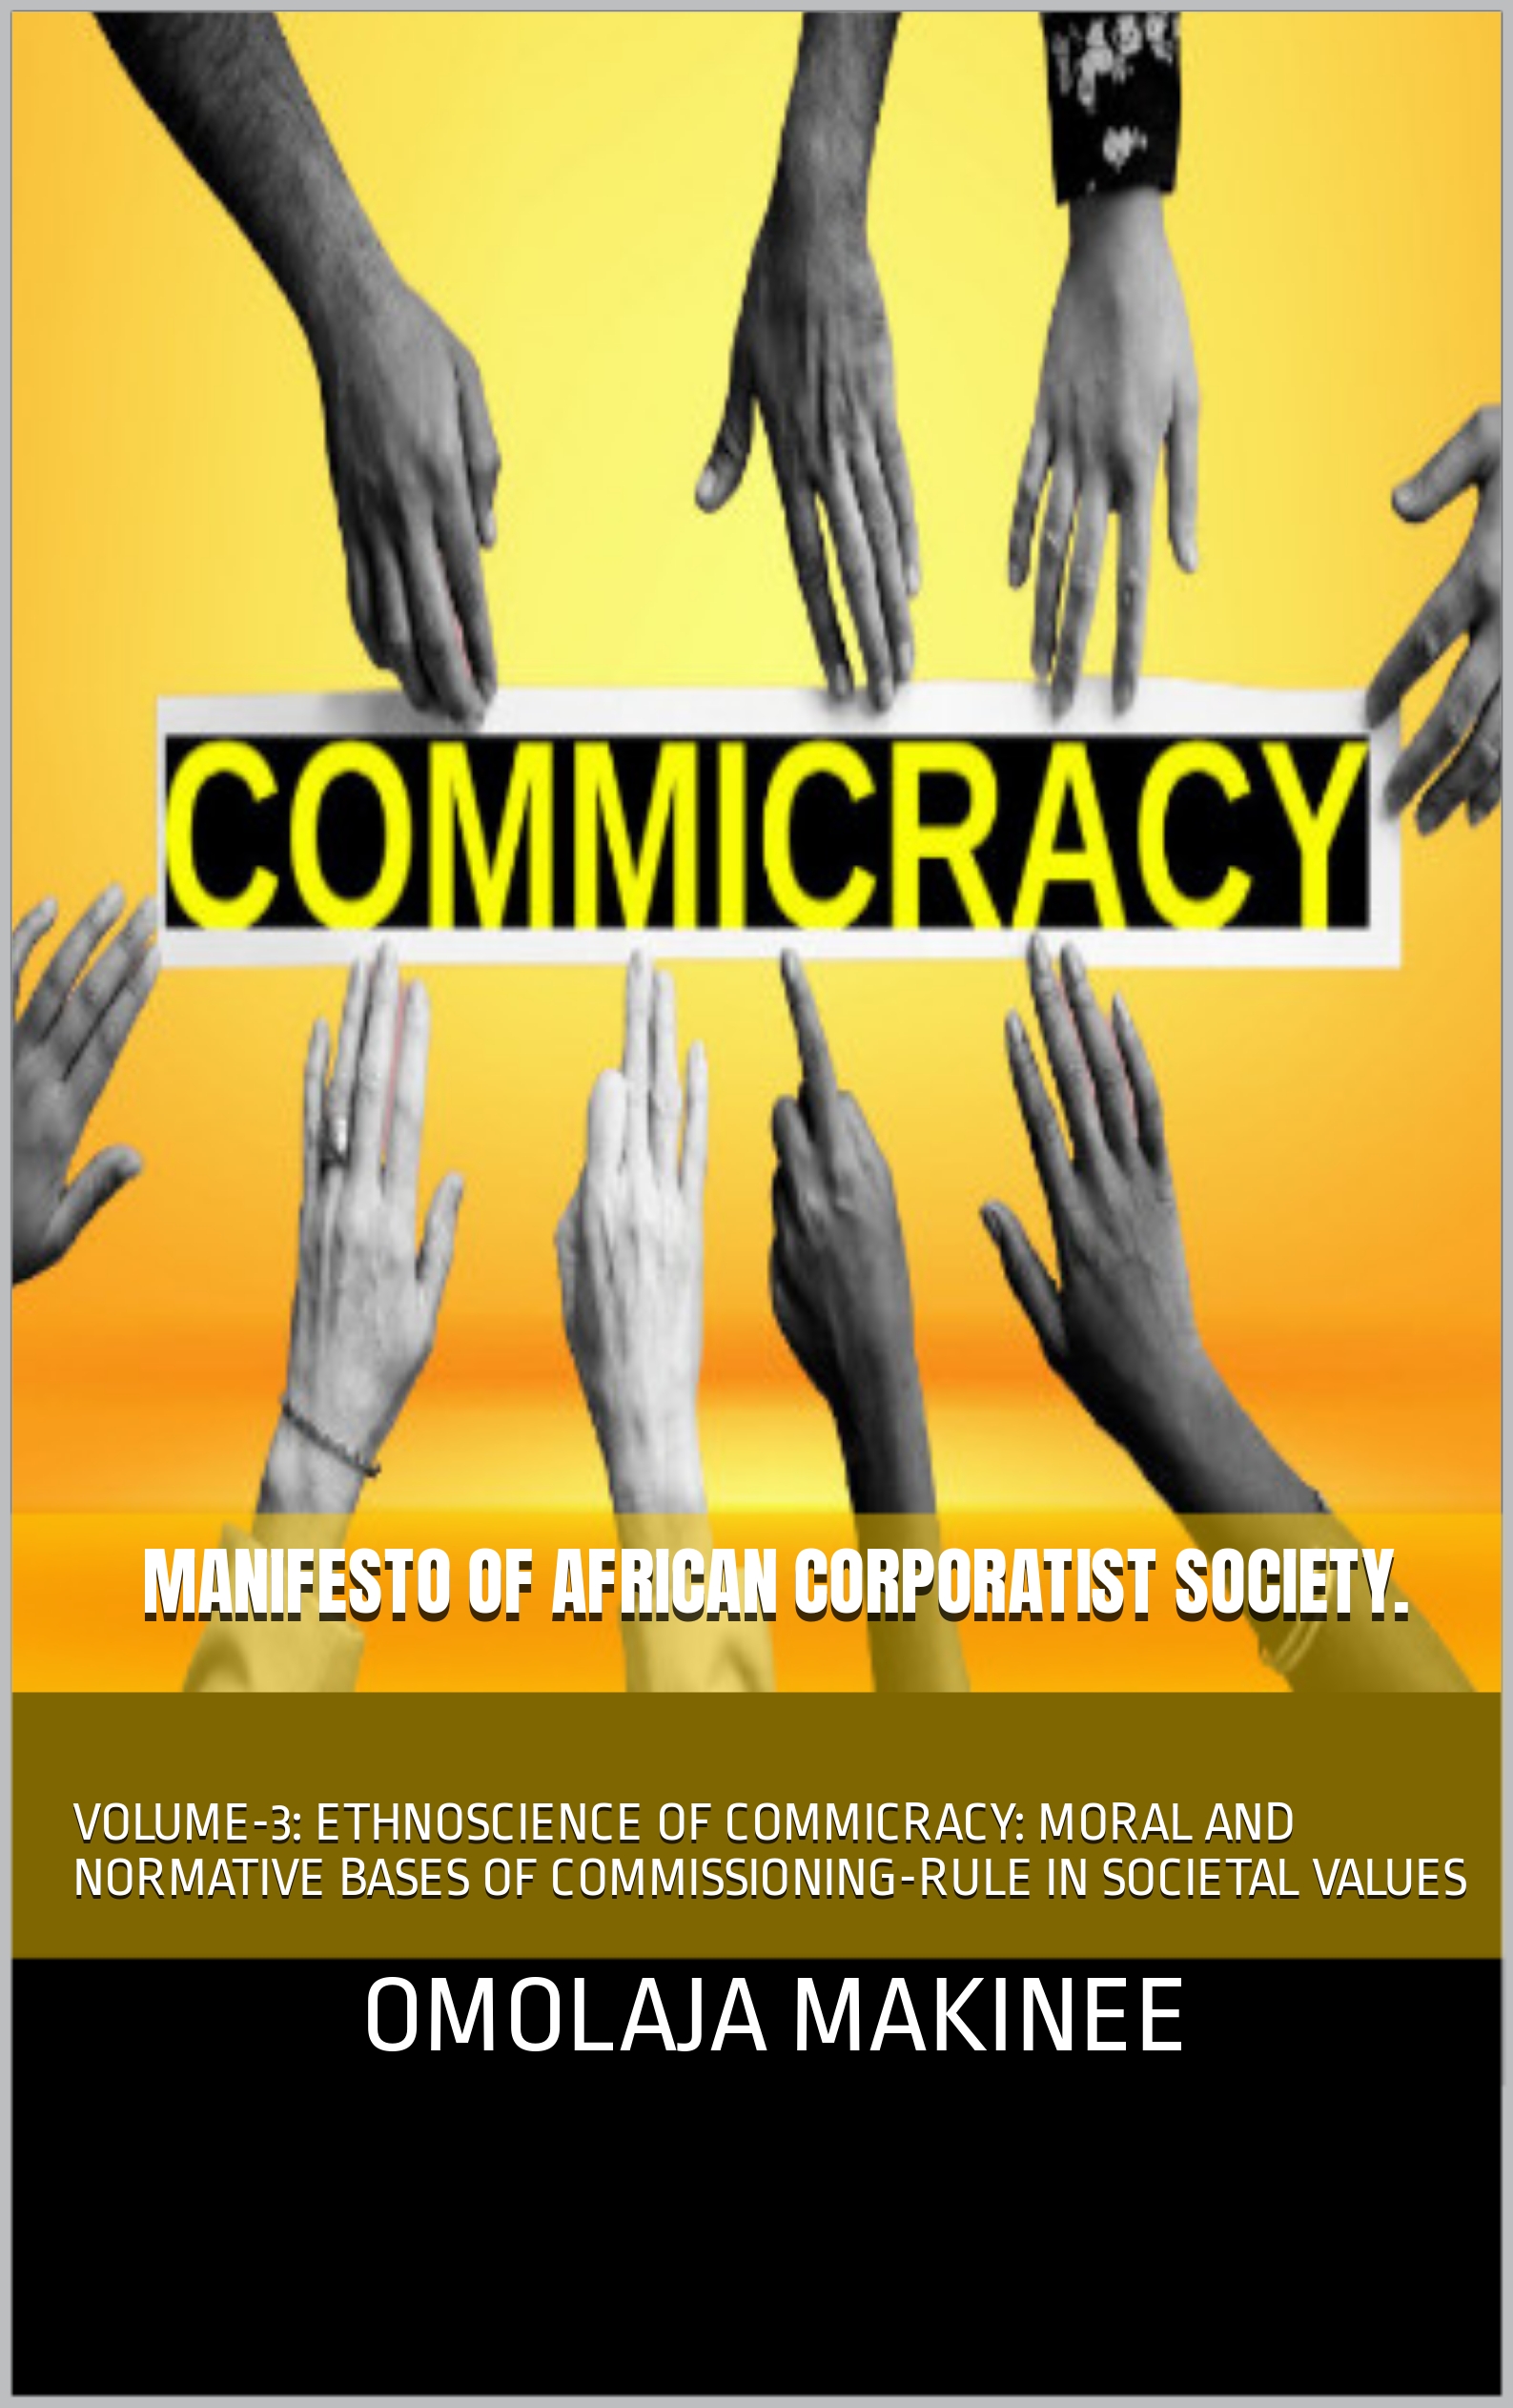 Book Cover: VOLUME 3: Ethnoscience of Commicracy